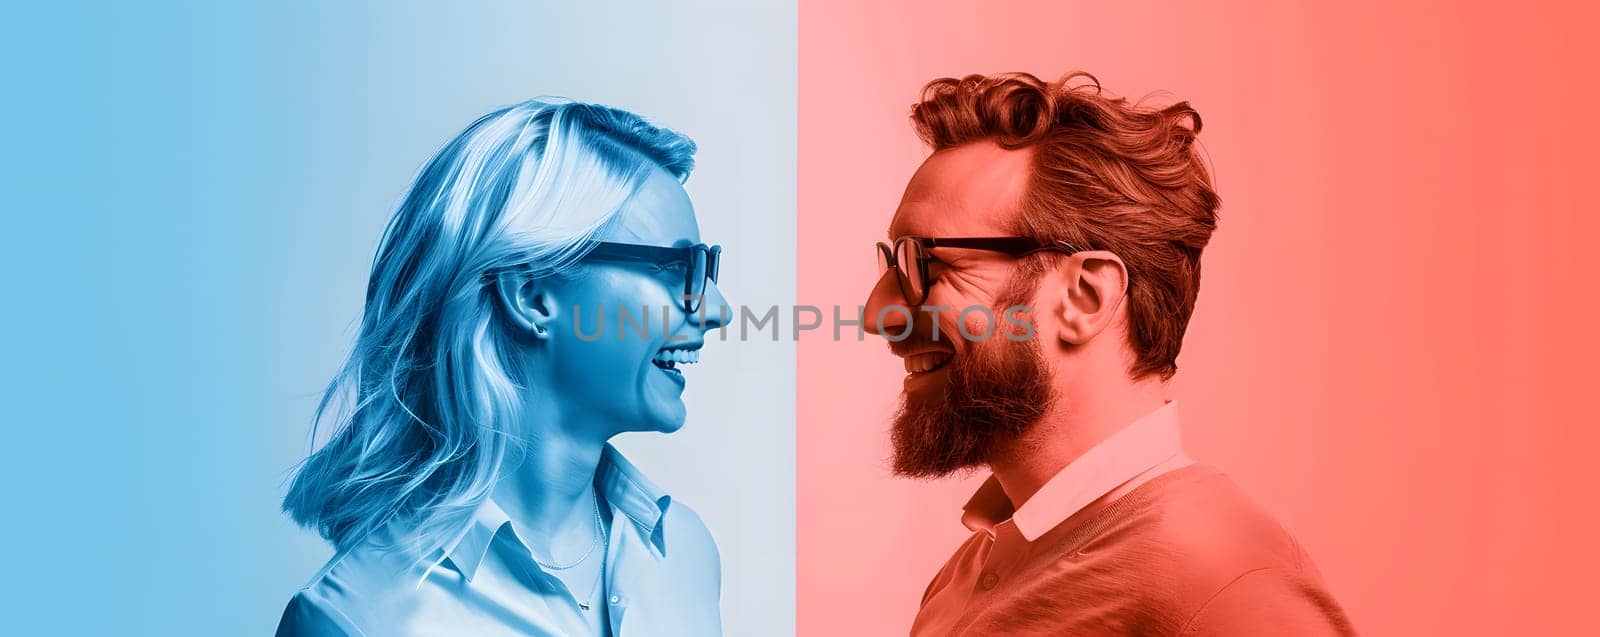 Man and woman make eye contact on blue and red backdrop by Nadtochiy